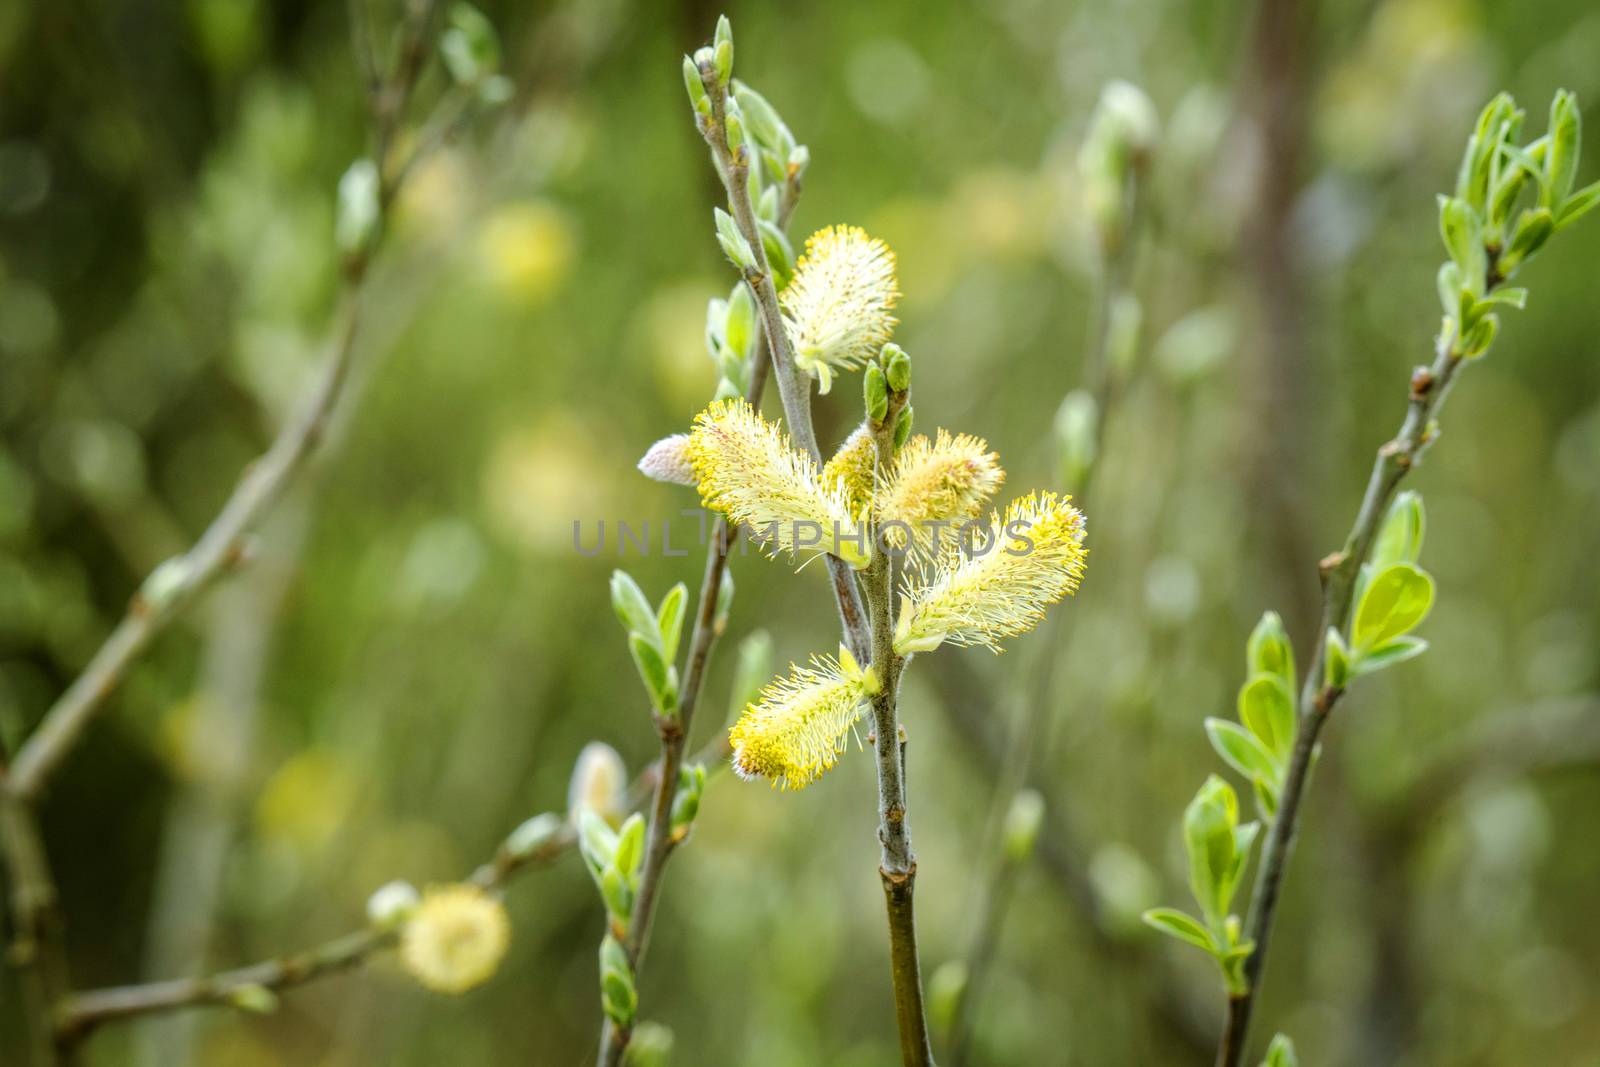 Blooming willow tree with pussy buds in the spring in beautiful green and yellow colors